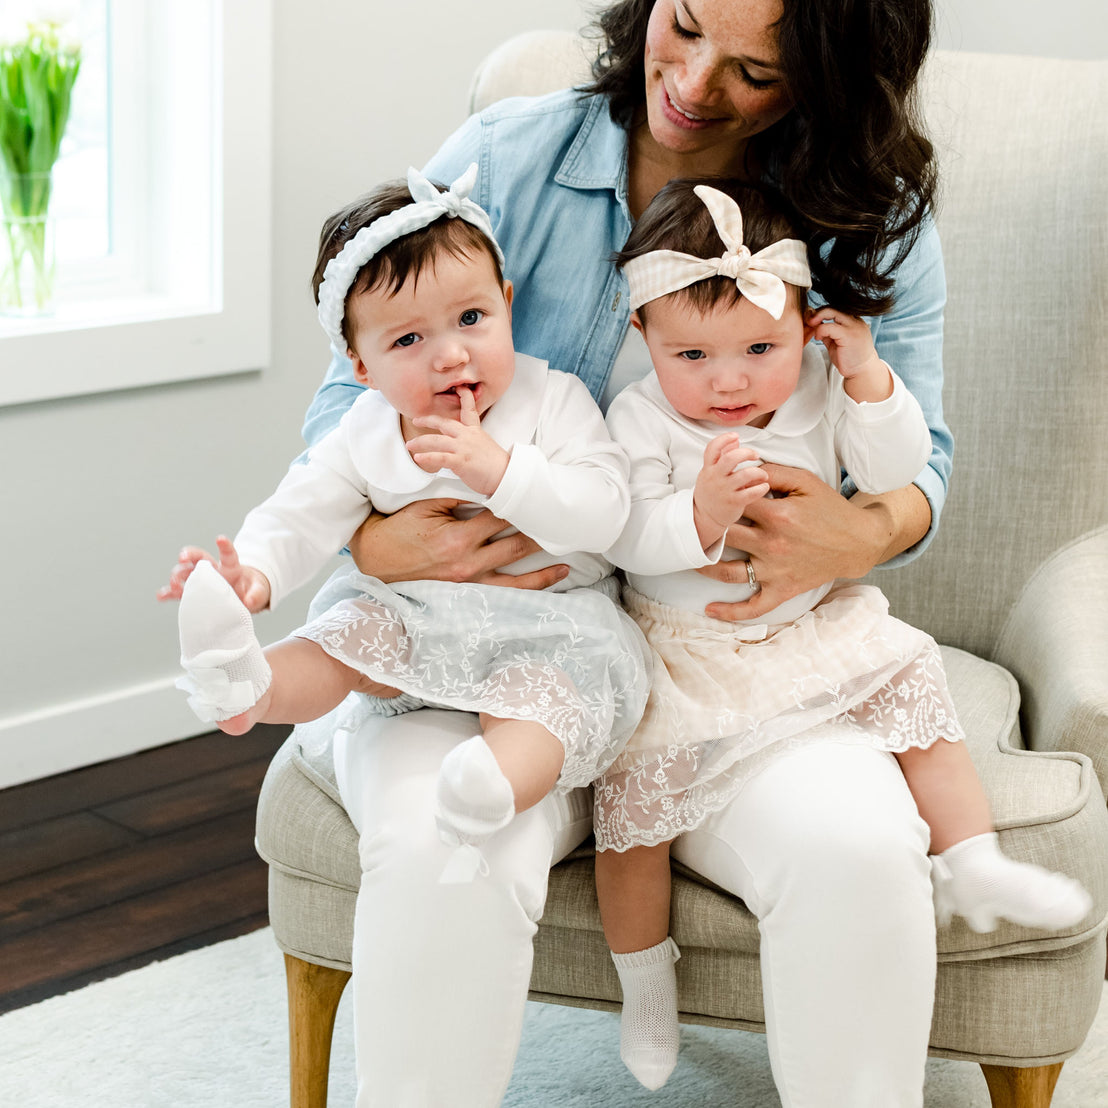 A mother sitting in a chair holding her newborn twin girls, dressed in matching Isla Bubble Skirt Sets with white onesies and matching Isla Tie Headbands. The room has a bright and cozy vintage interior.